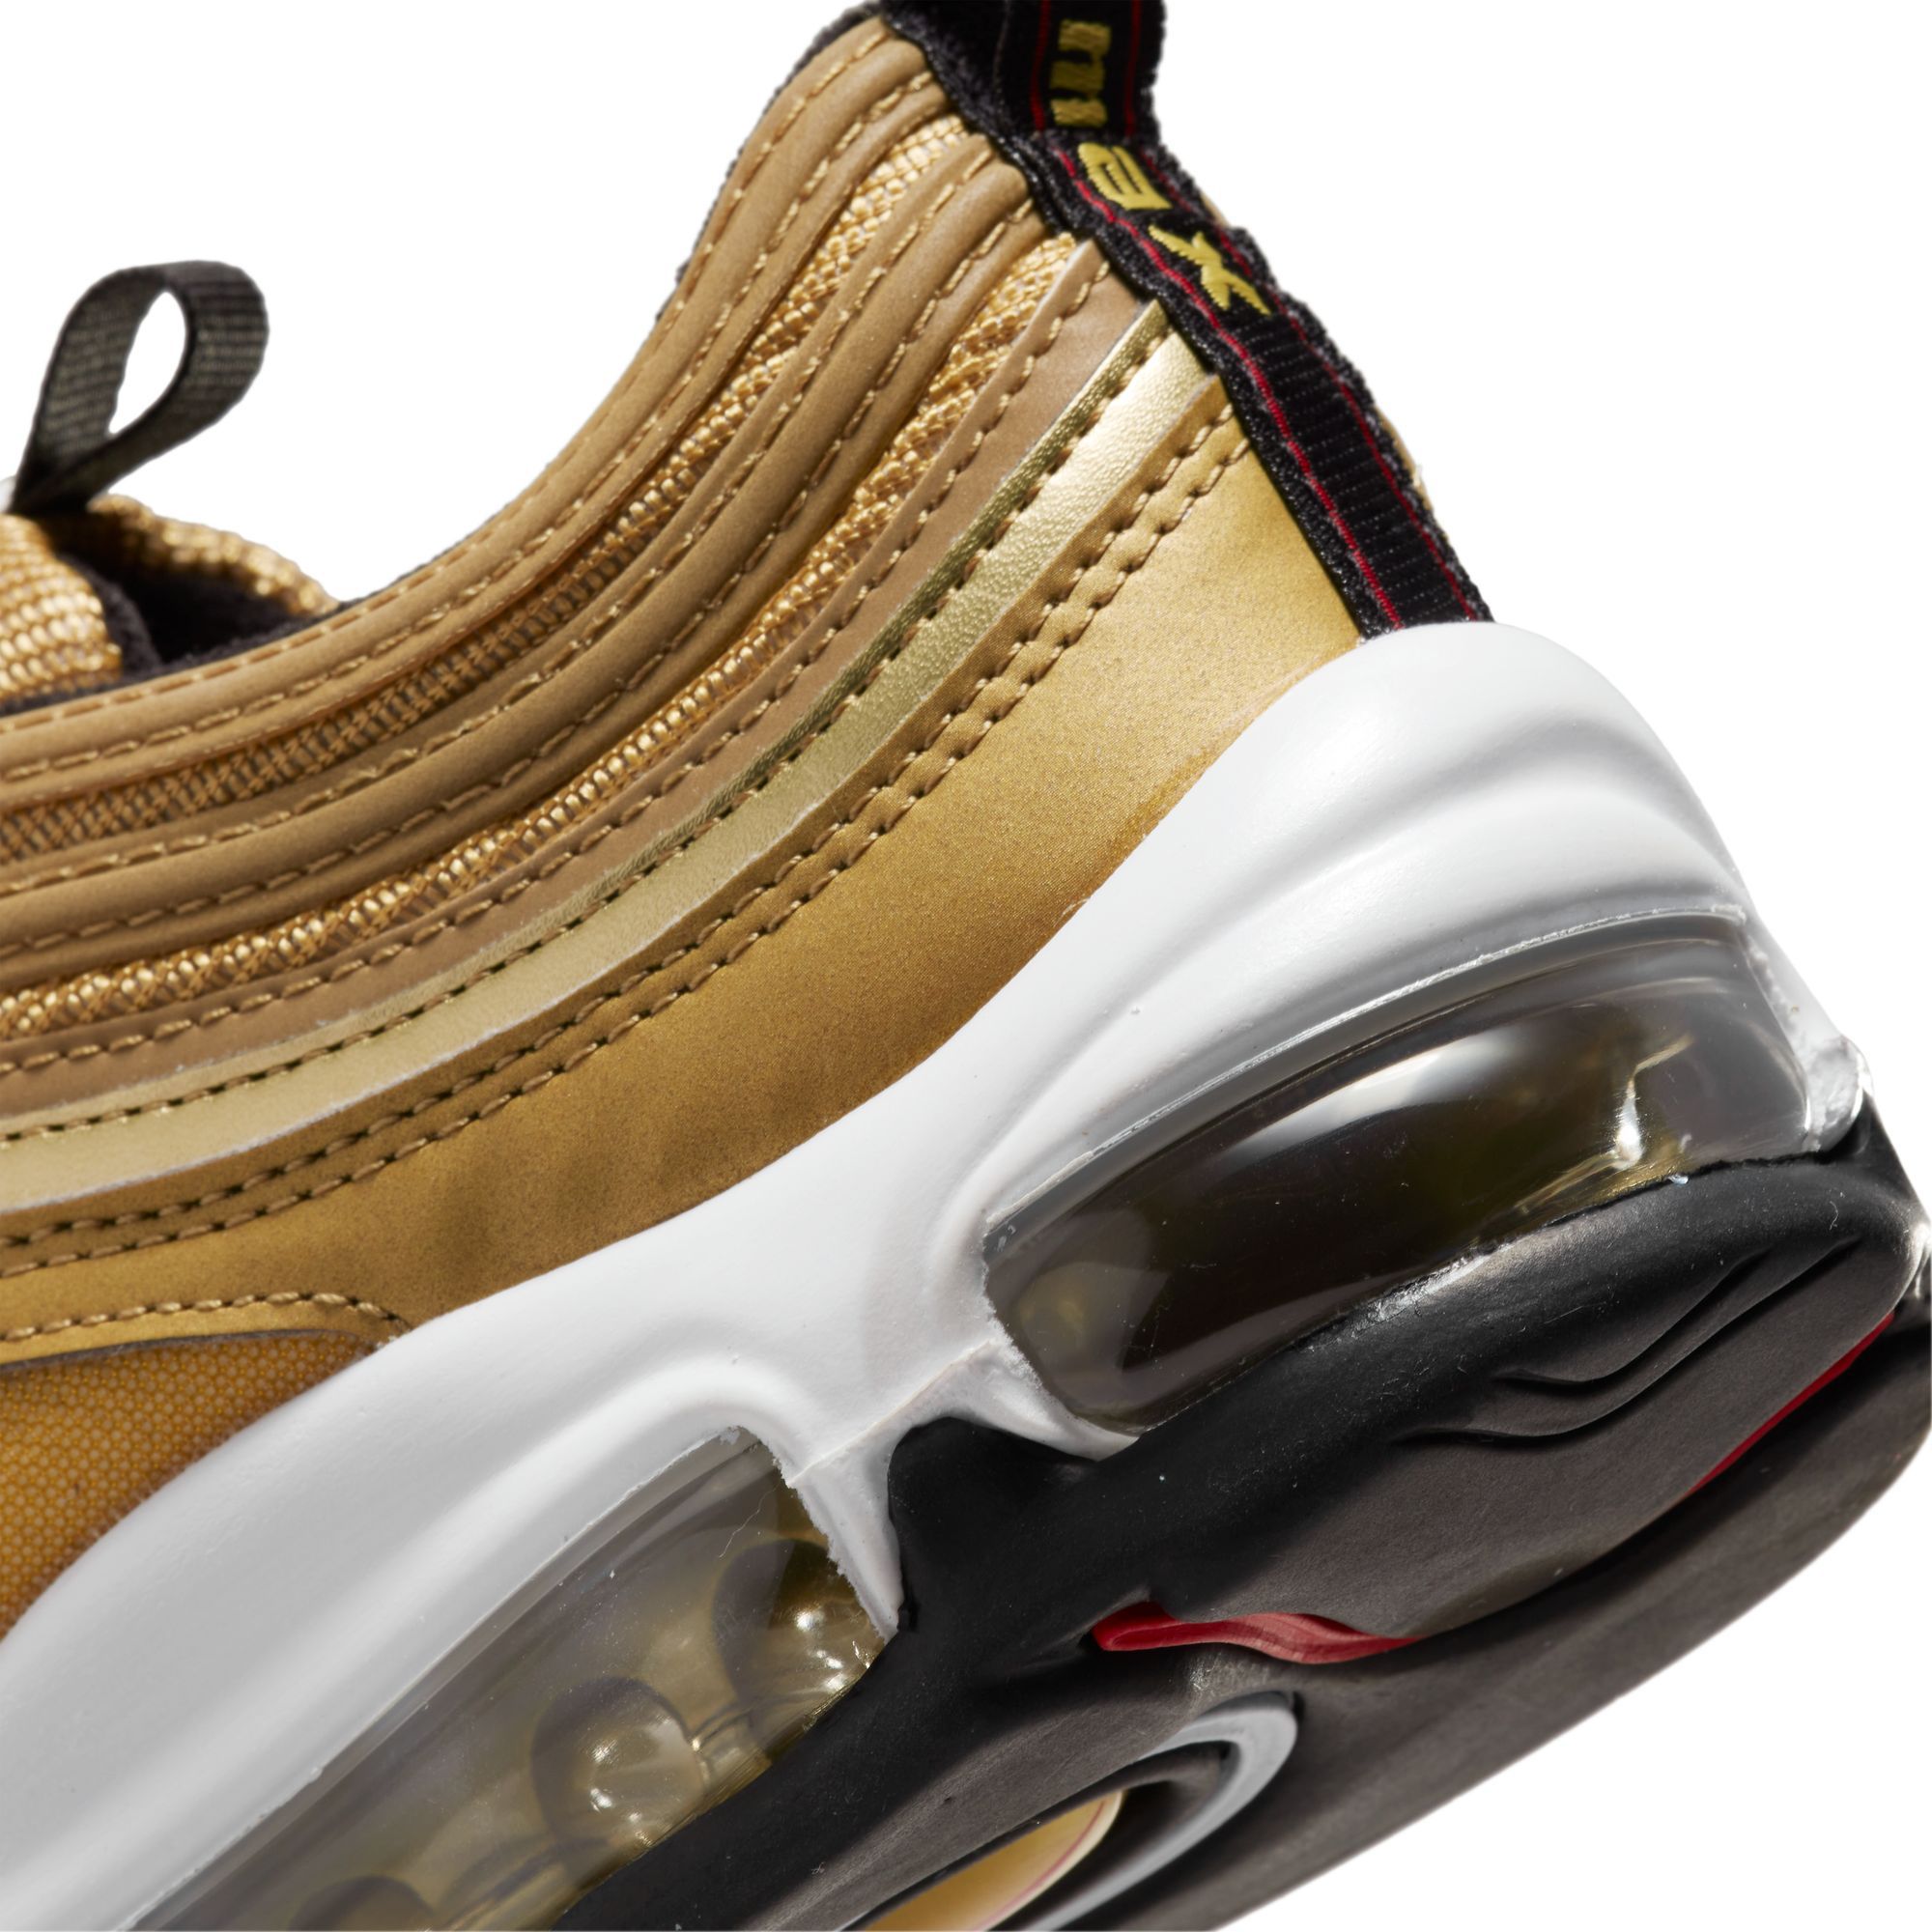 Nike Air Max 97 Olympic Gold for Sale, Authenticity Guaranteed